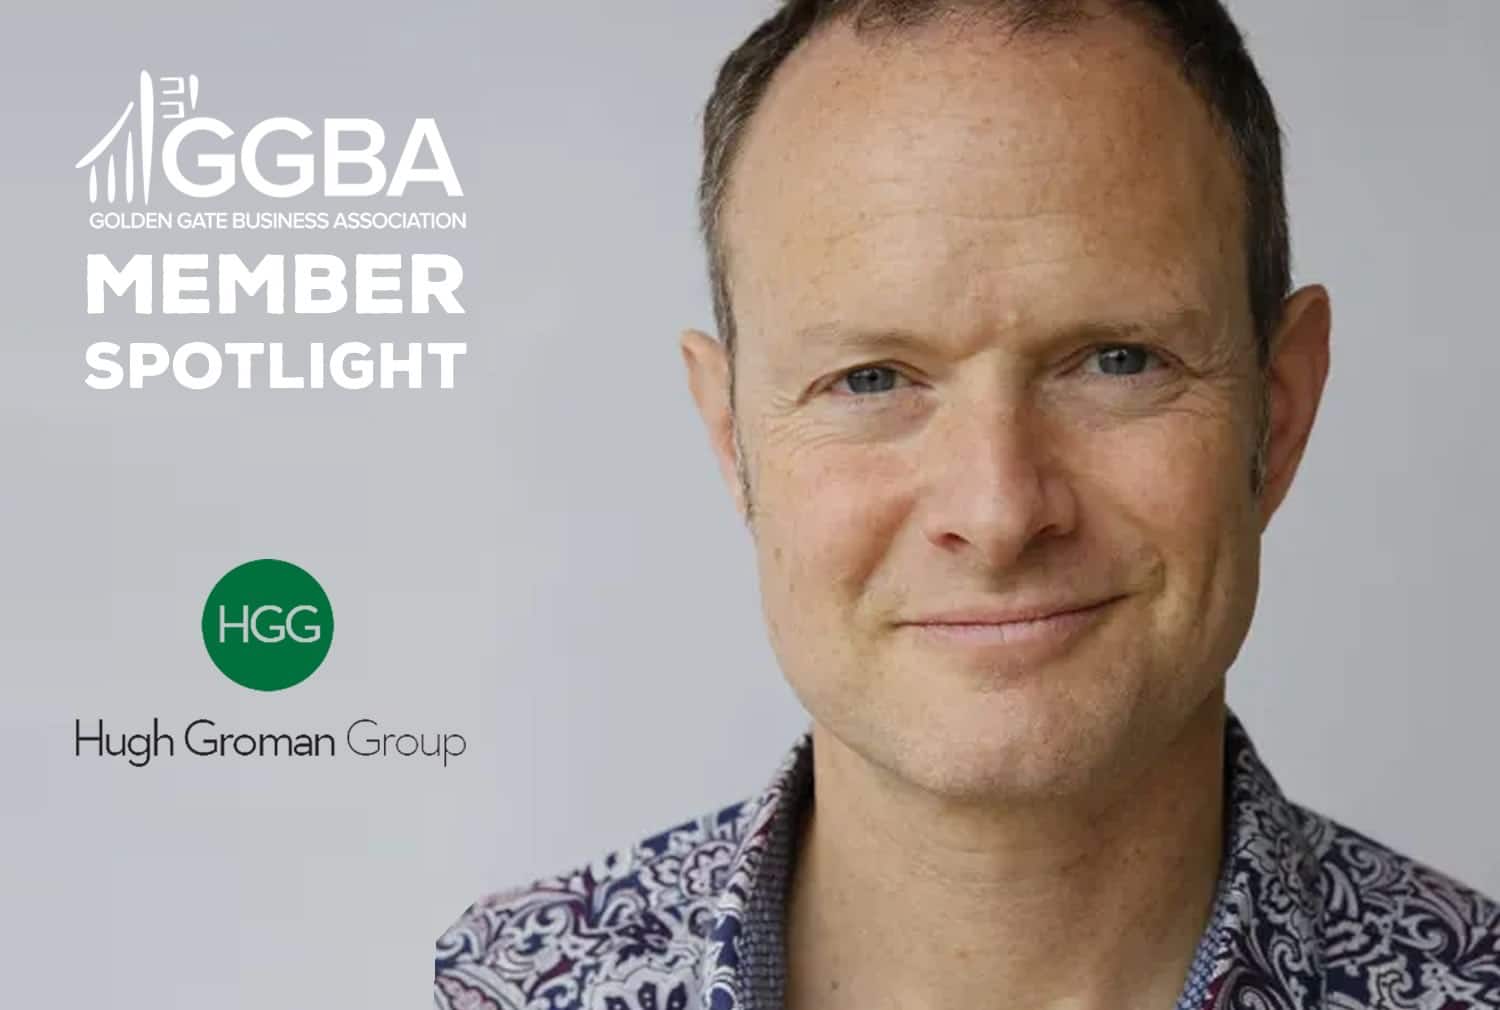 You are currently viewing Member Spotlight: The Hugh Groman Group